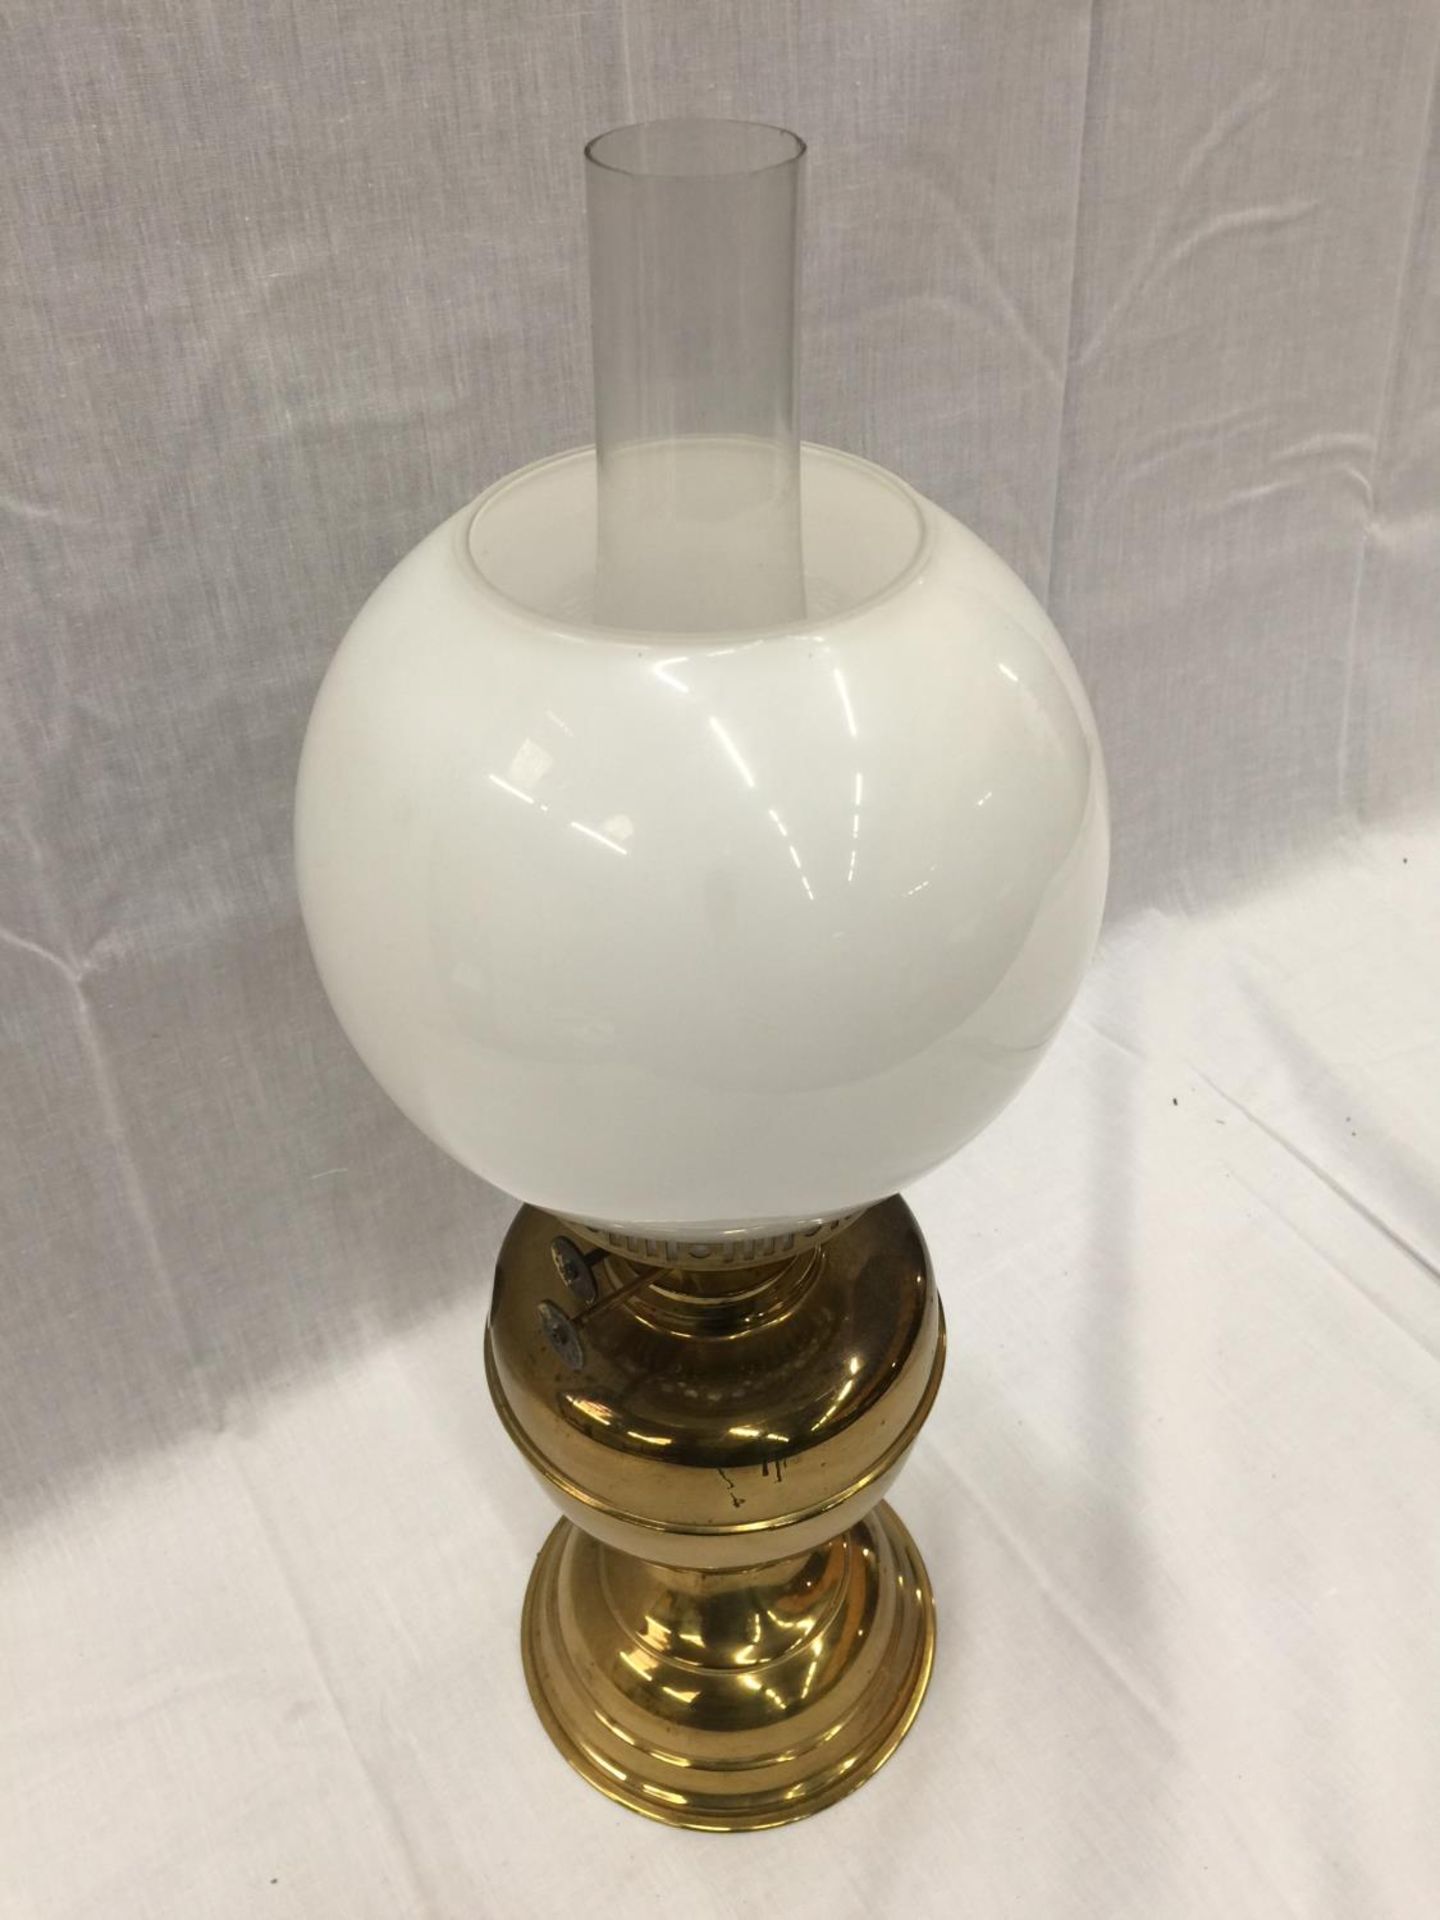 A HEAVY BRASS OIL LAMP WITH GLASS CHIMNEY AND MILK GLASS SHADE, HEIGHT APPROX 50CM - Image 2 of 4